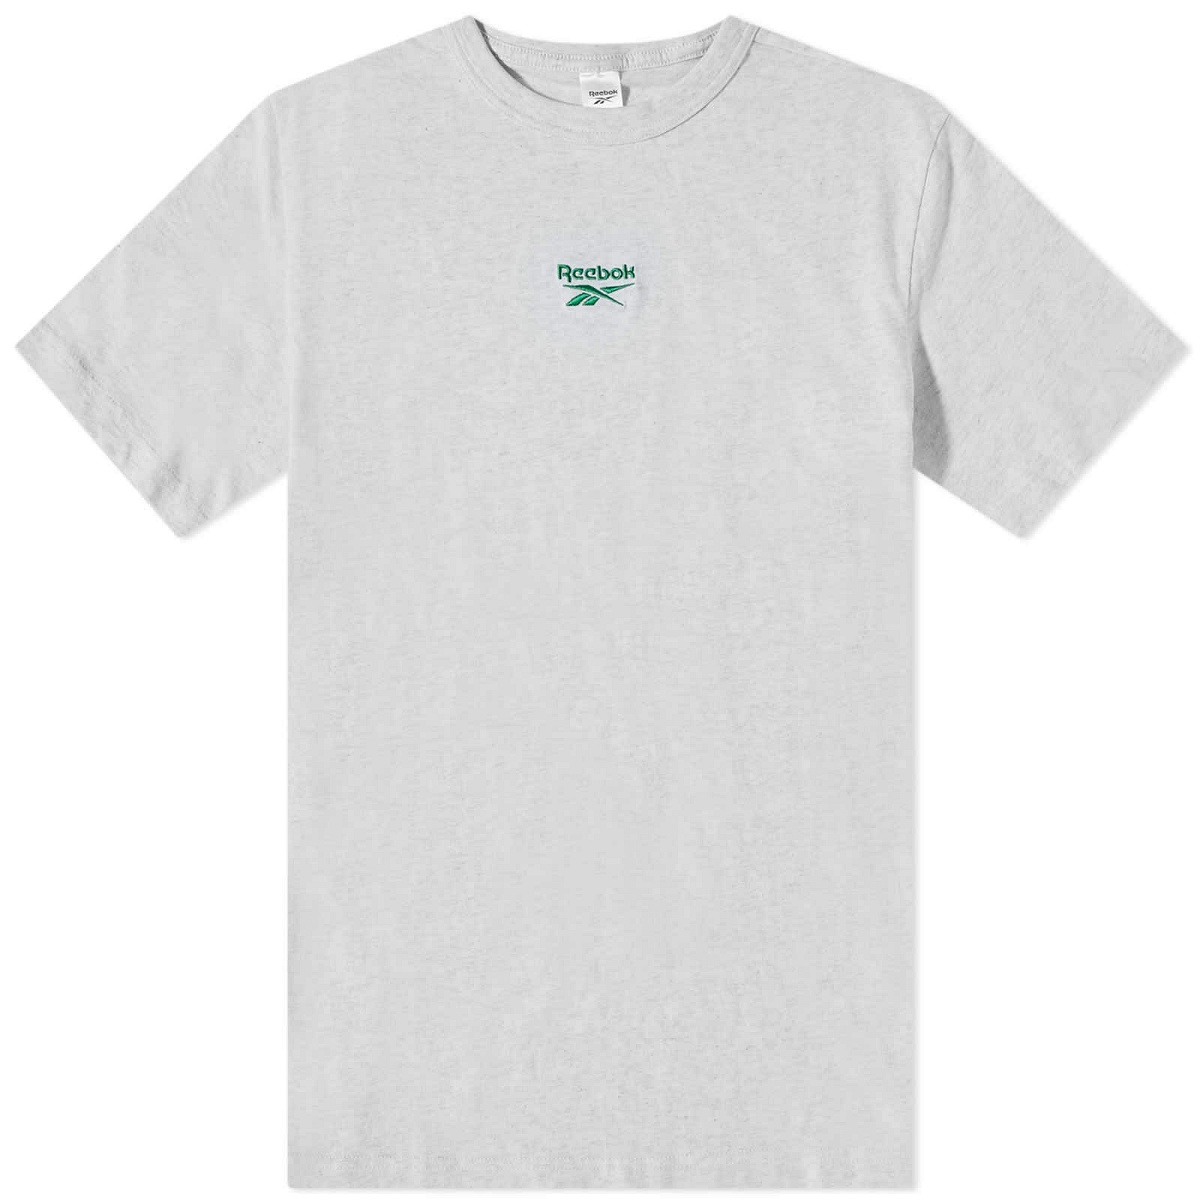 Reebok by White Moss Reebok Collection 3 Pyer T-Shirt Graphic